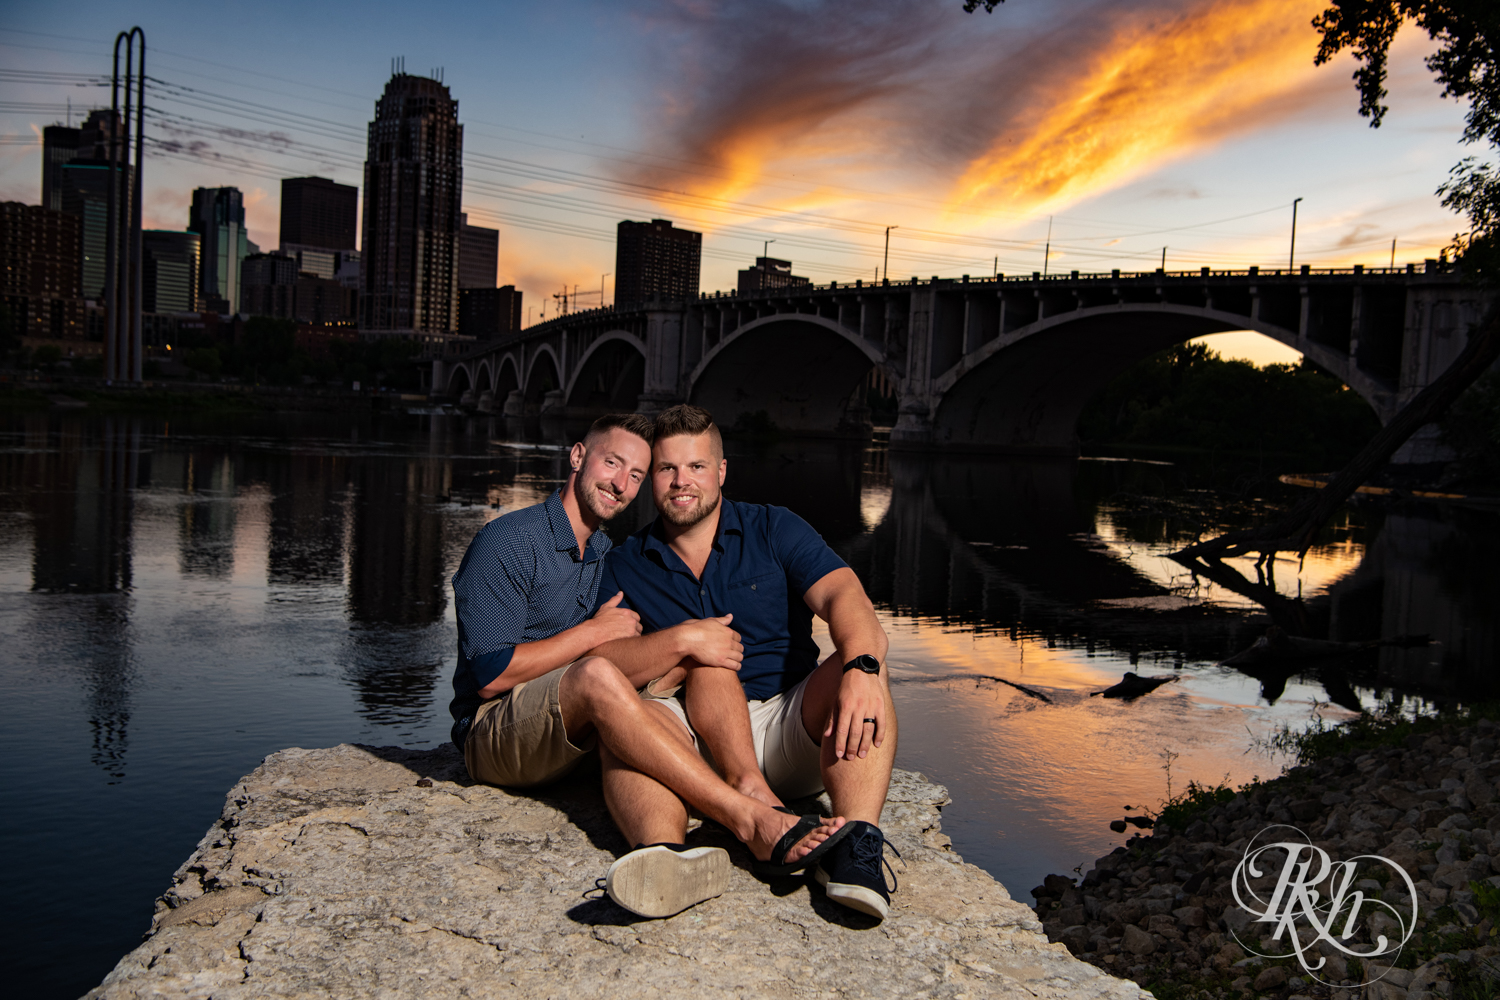 Two gay men snuggle in front of river during sunset in Saint Anthony Main in Minneapolis, Minnesota.